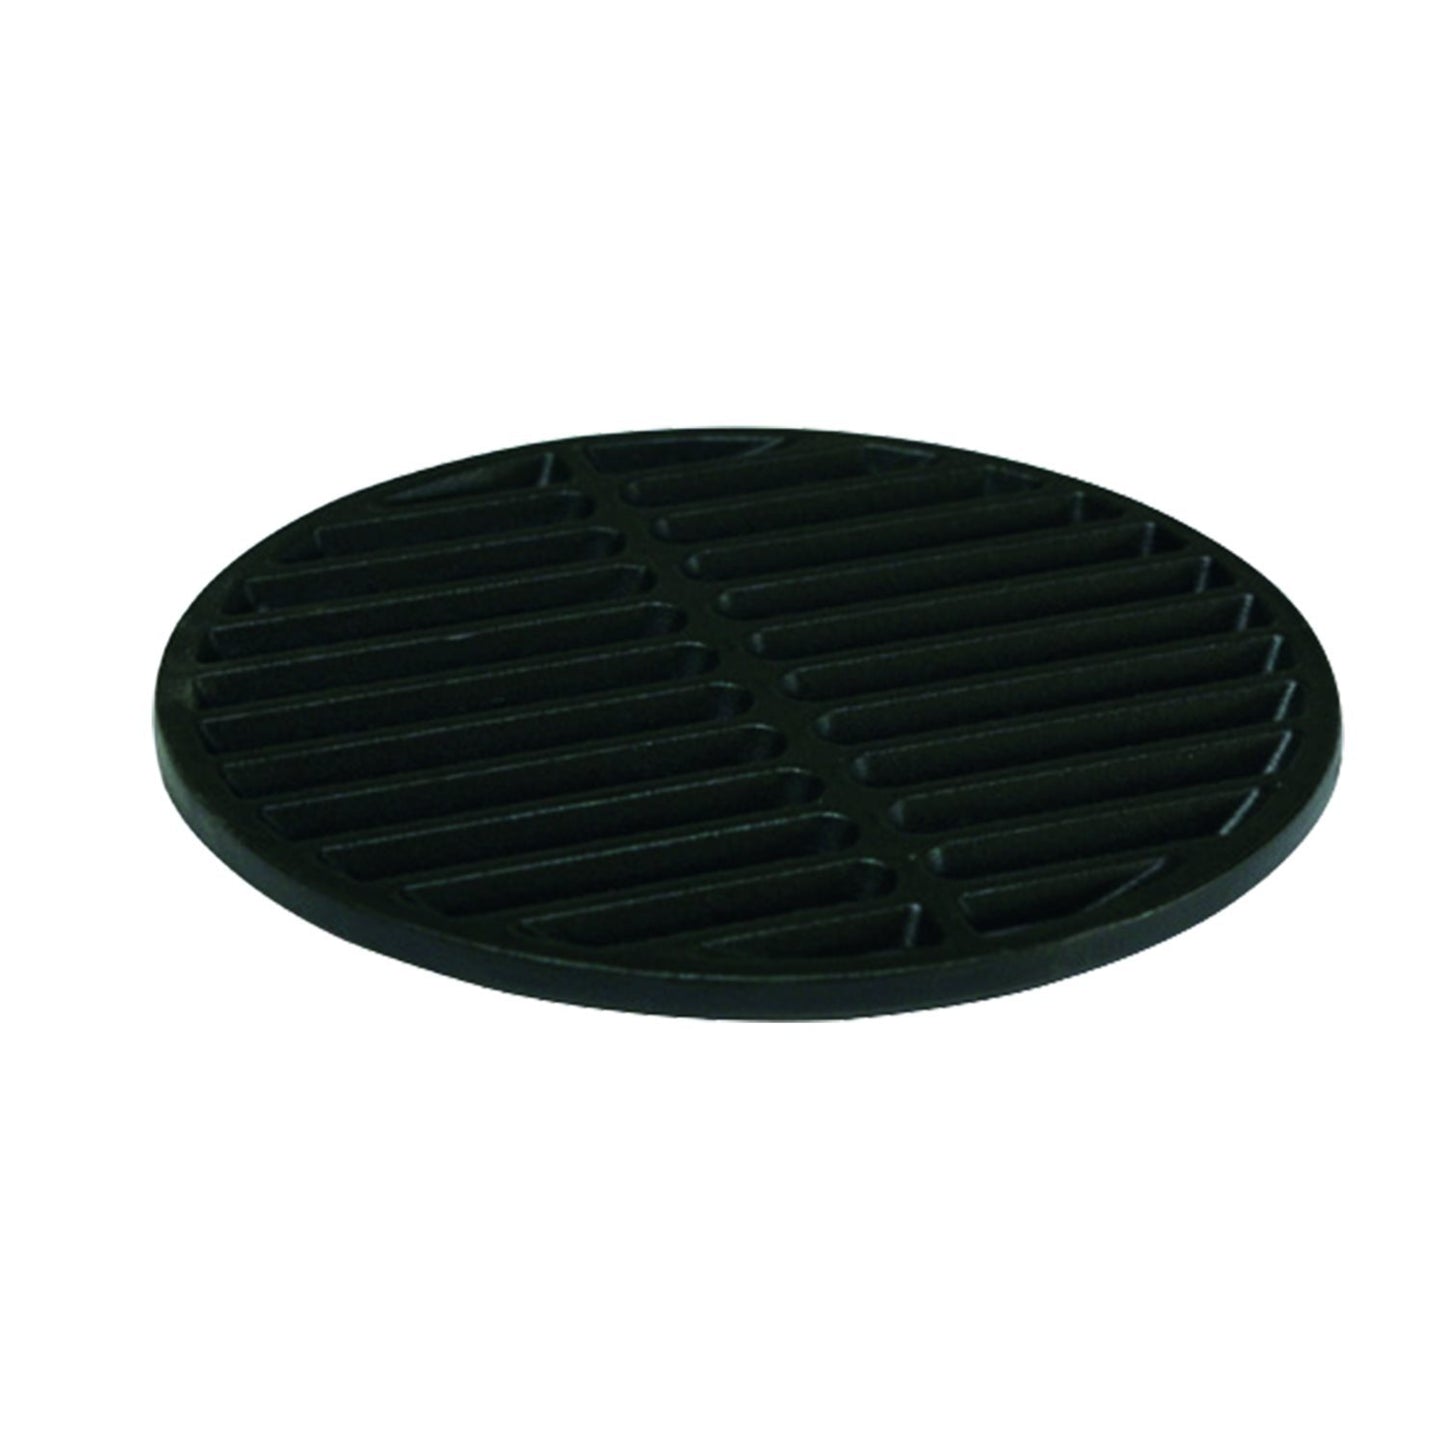 Grizzly Grills Cast Iron Grid large